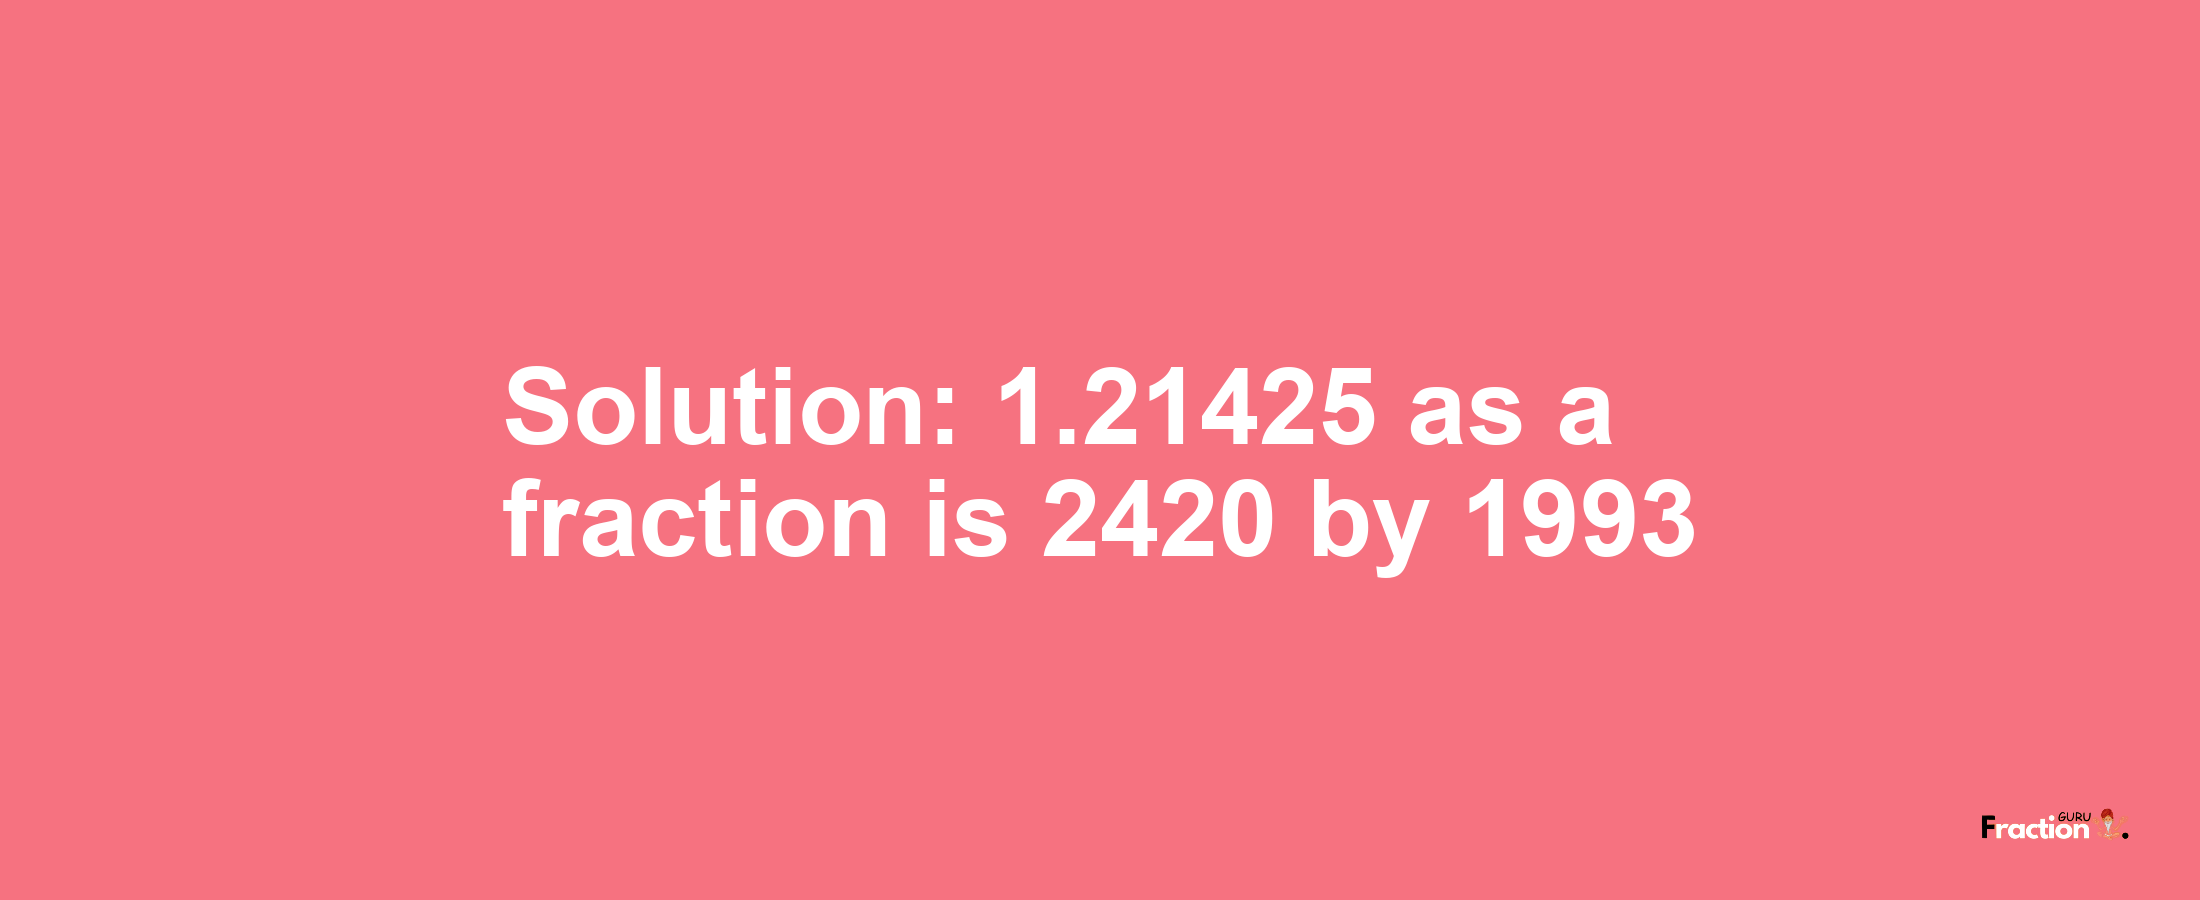 Solution:1.21425 as a fraction is 2420/1993